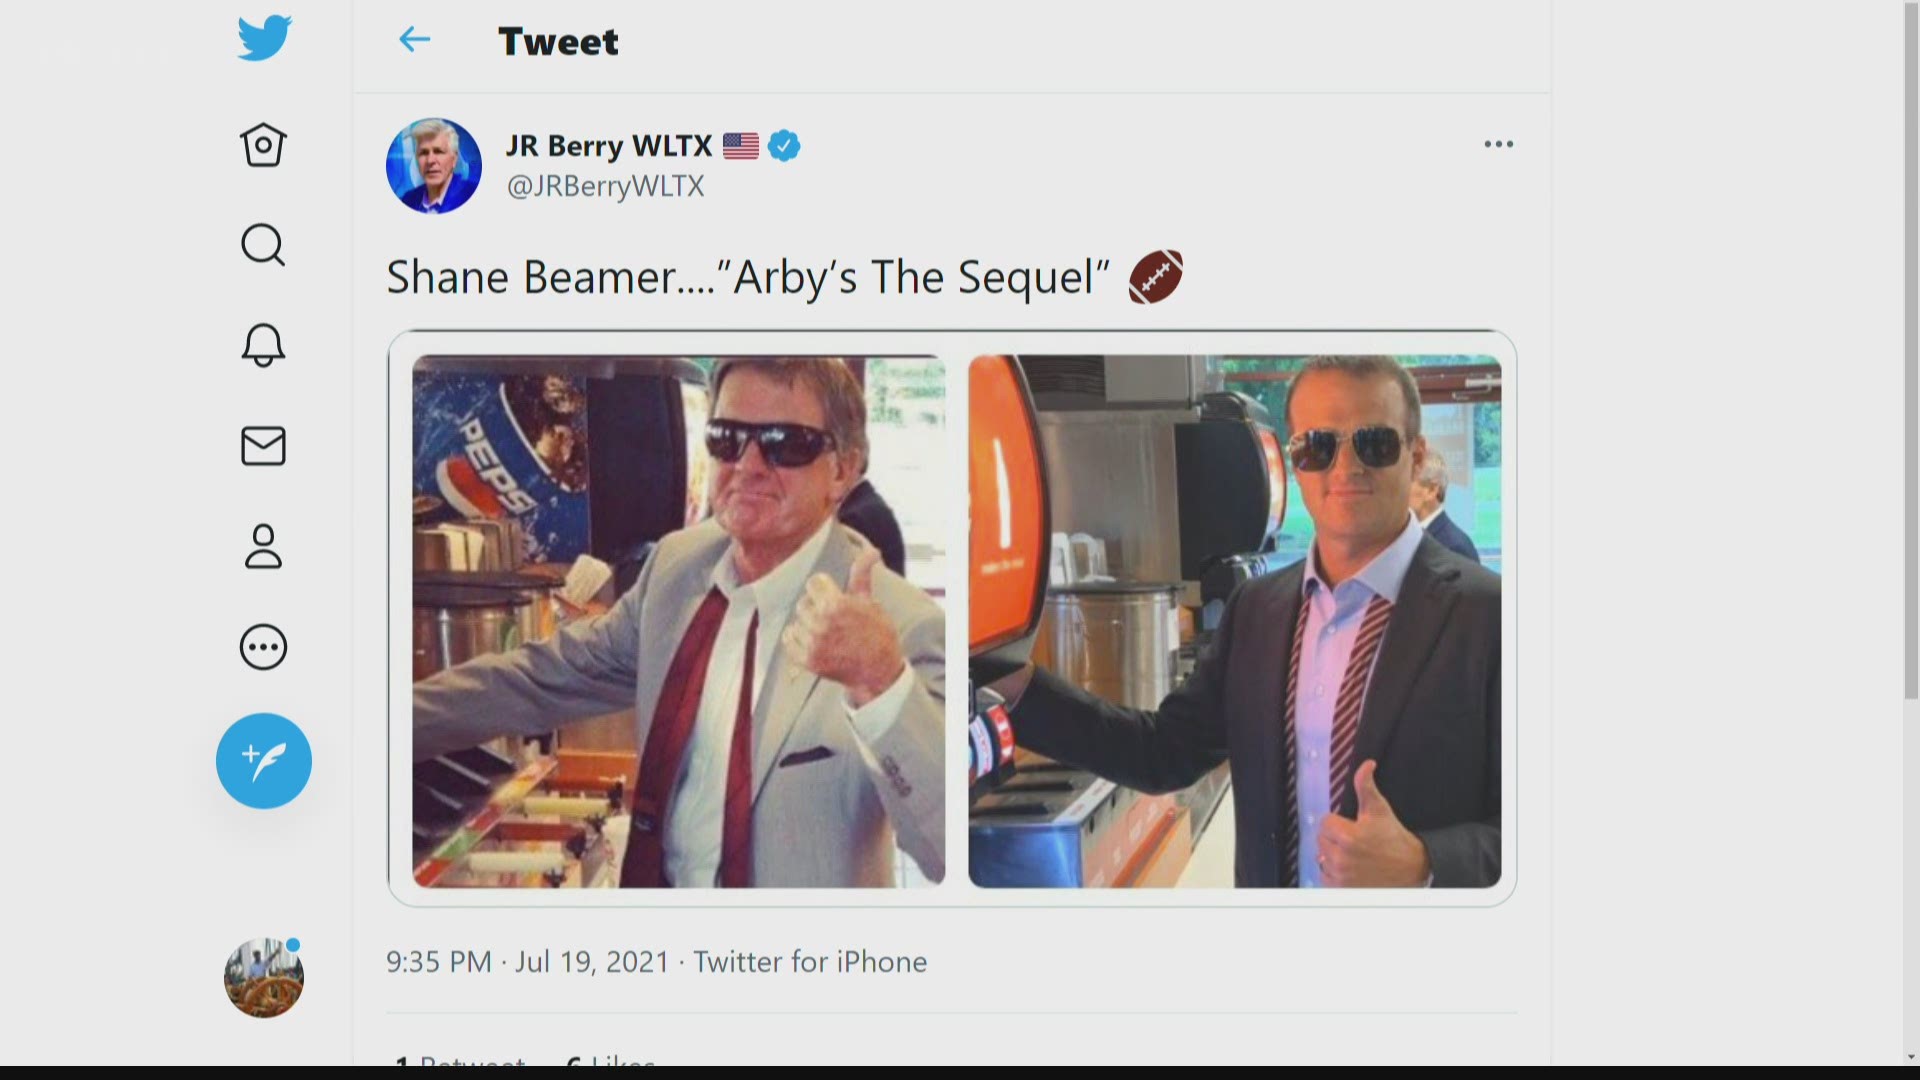 Gamecock football coach Shane Beamer paid tribute to former USC coach Steve Spurrier in a recreation of Spurrier's classic photo at Arby's.